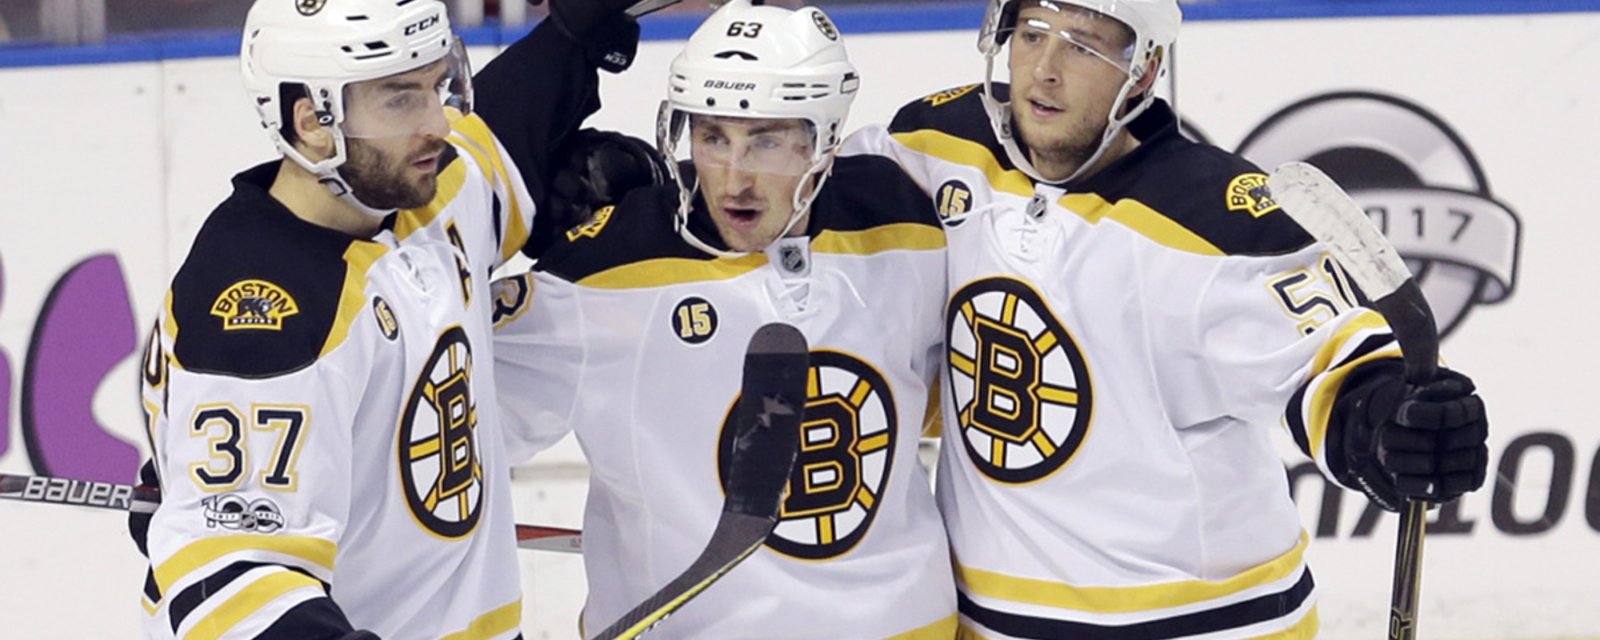 Marchand and Spooner set to return?